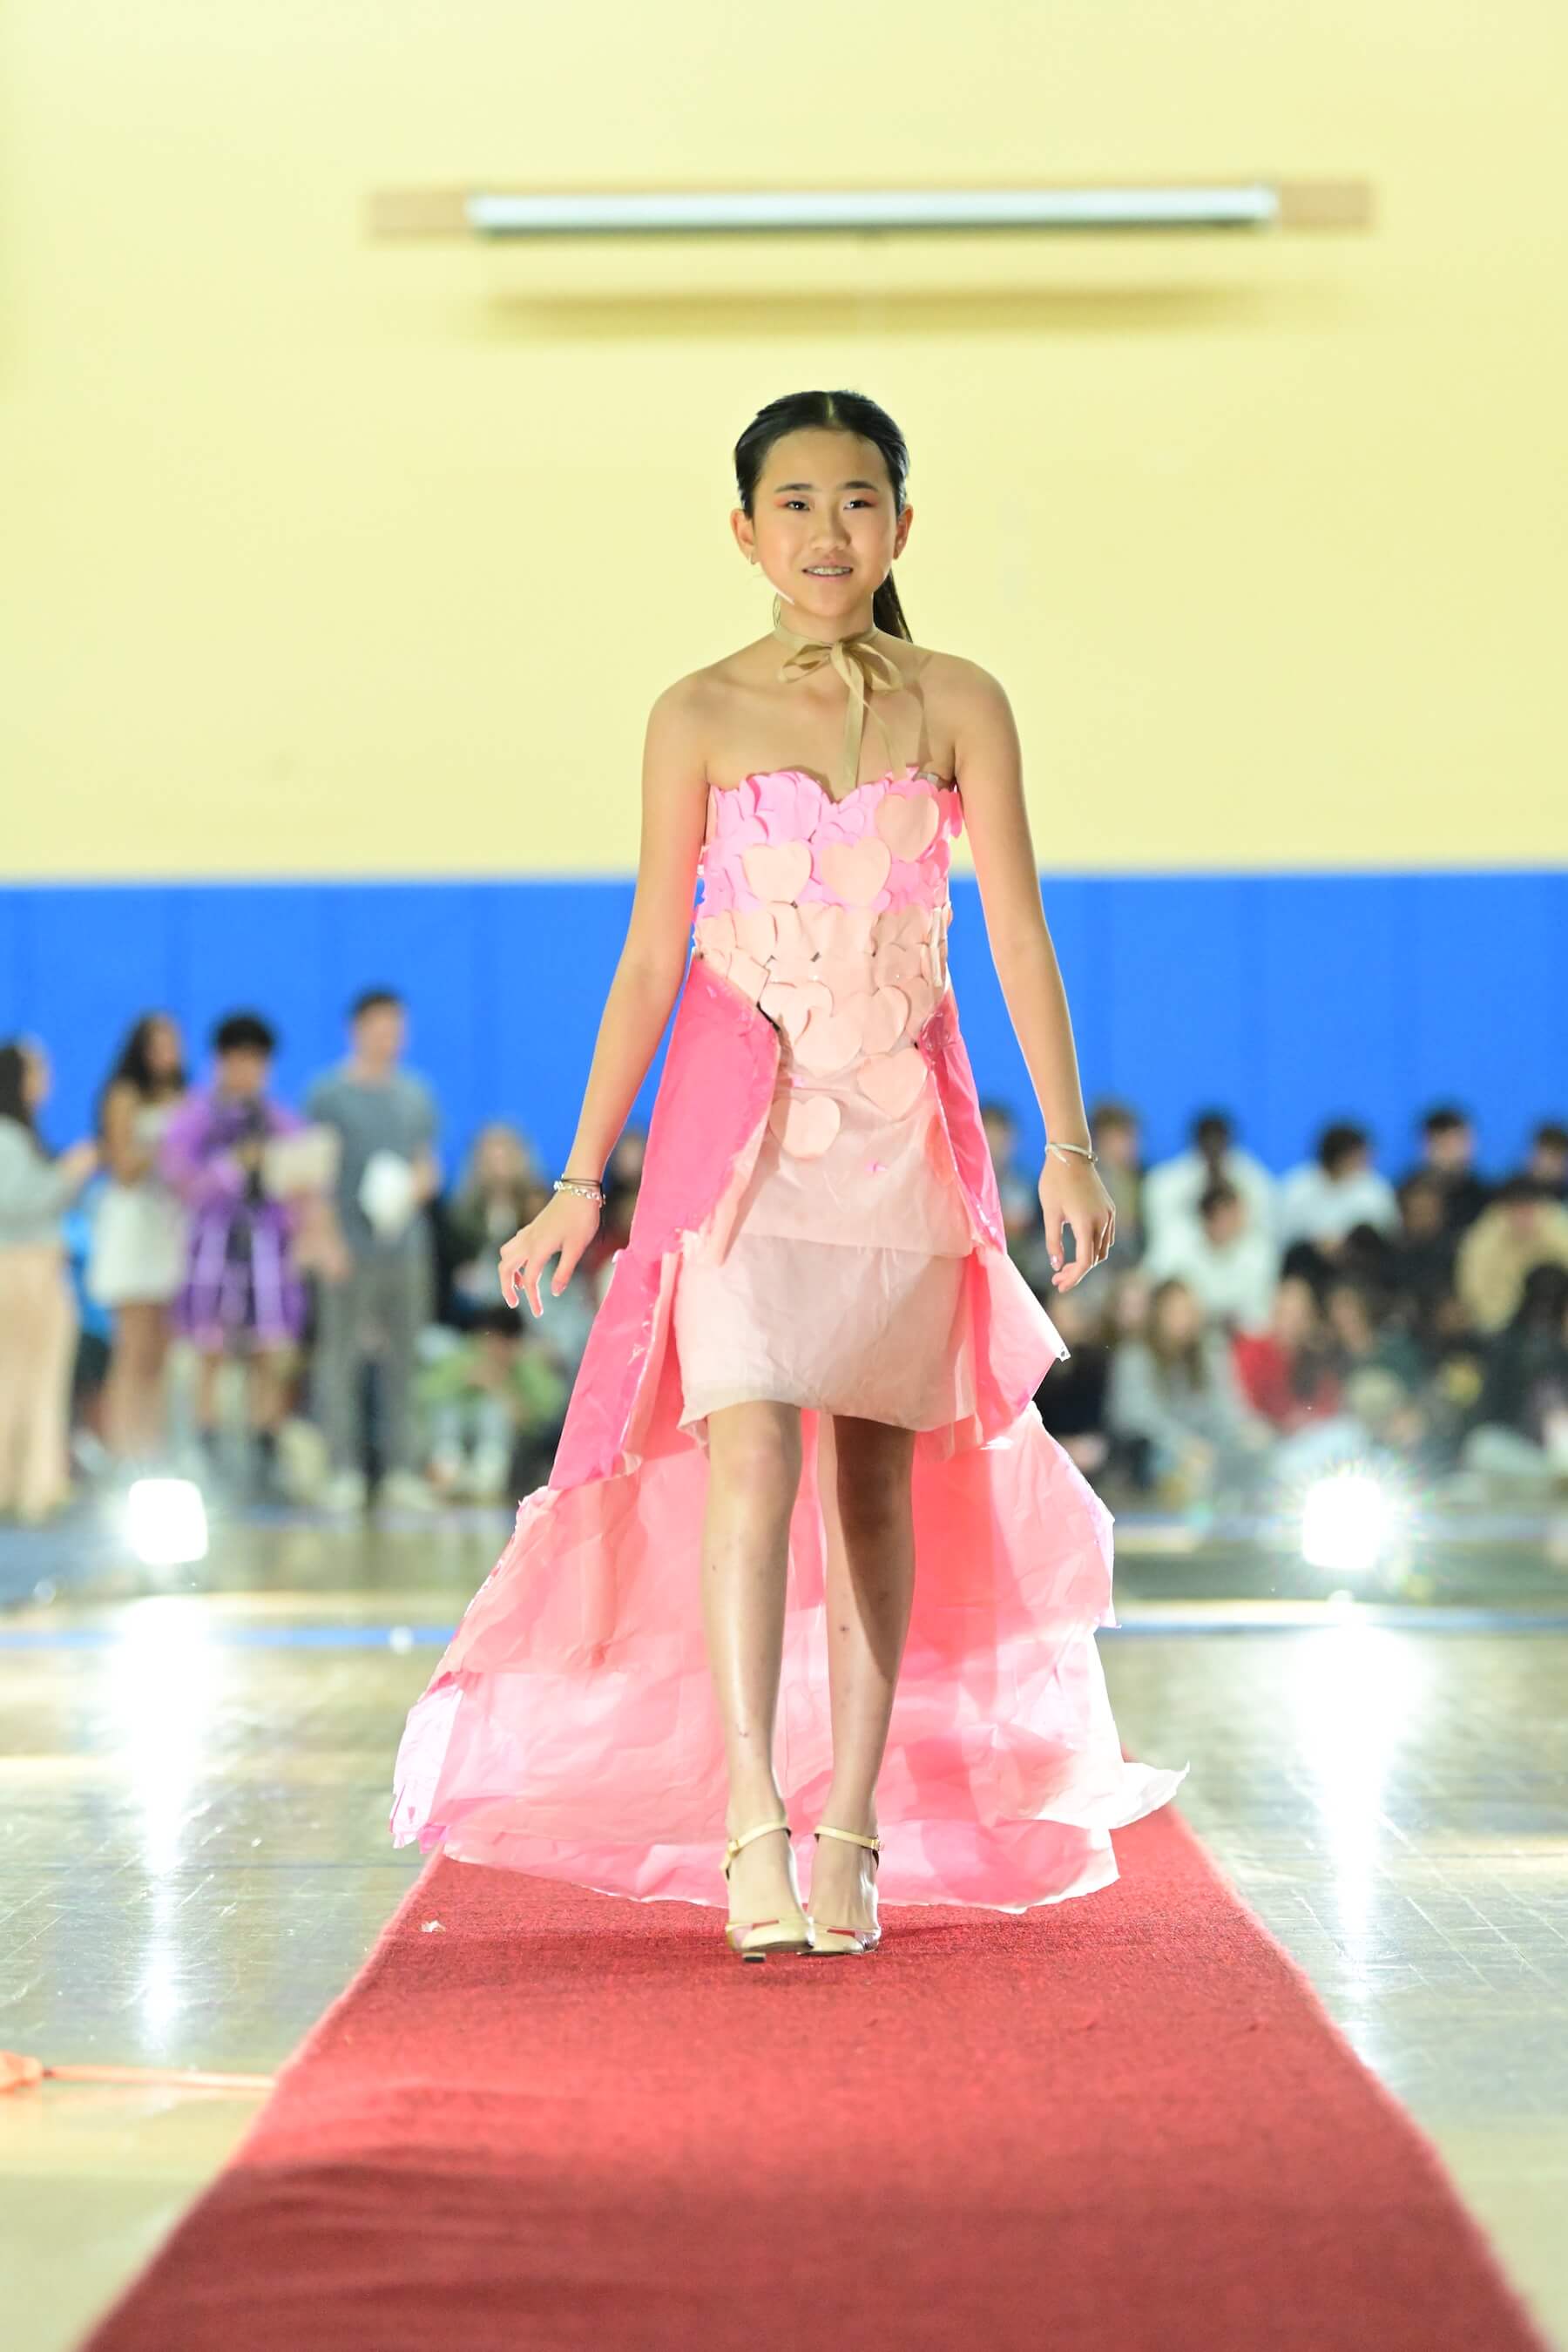 An Ethical Culture Fieldston Middle School student models at the Fashion Show.